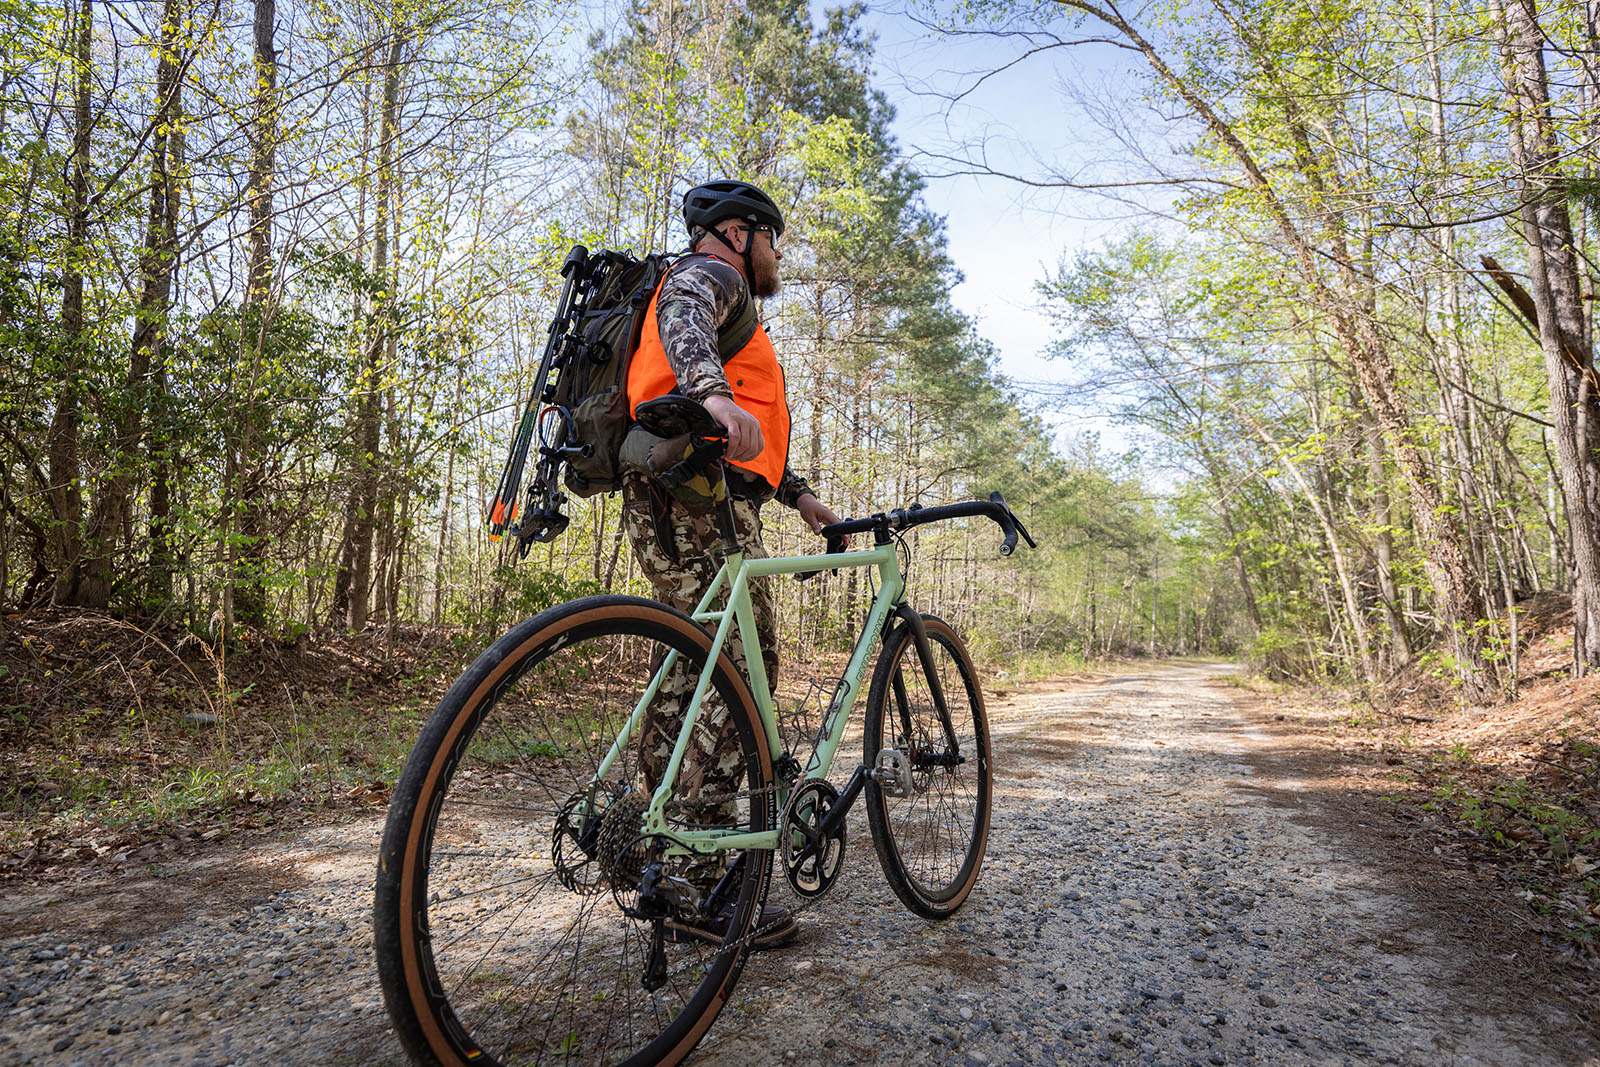 A photo of a man in camouflage and blaze orange, wearing a bike helmet and with a large backpack, stands next to a bike on a gravel road in the woods.